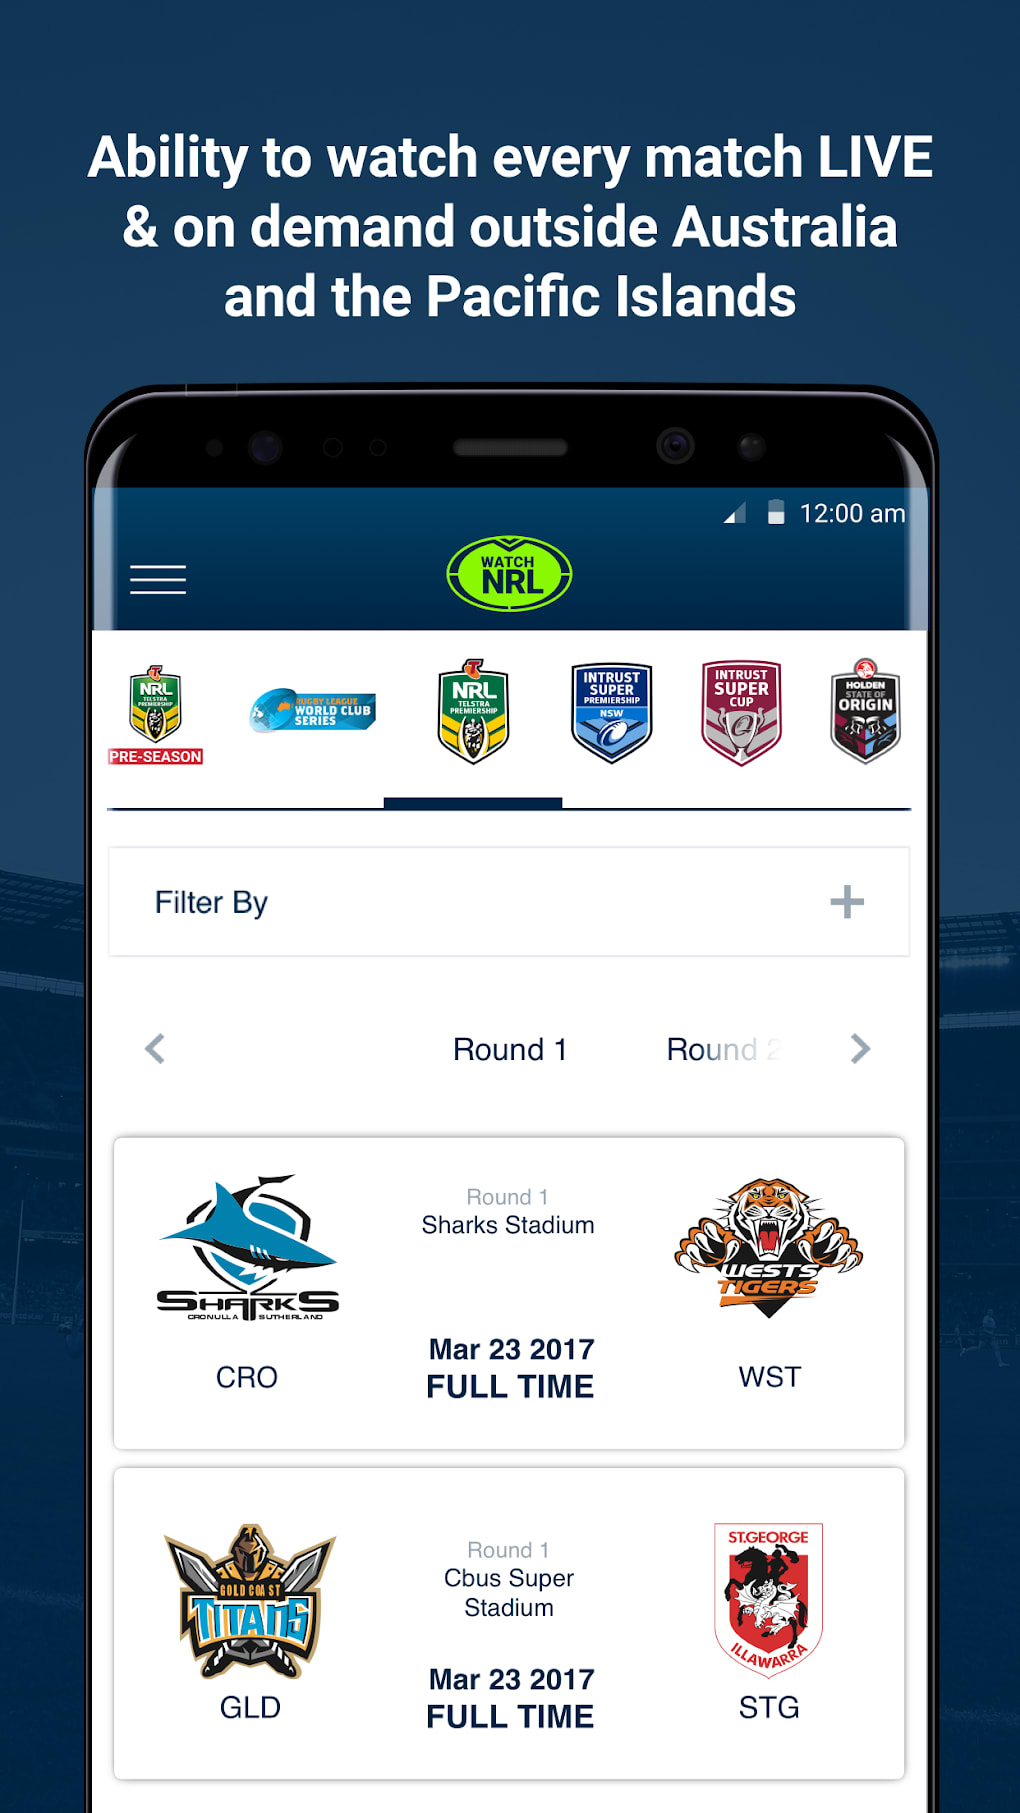 How do I change my password on Watch NRL? : Watch NRL